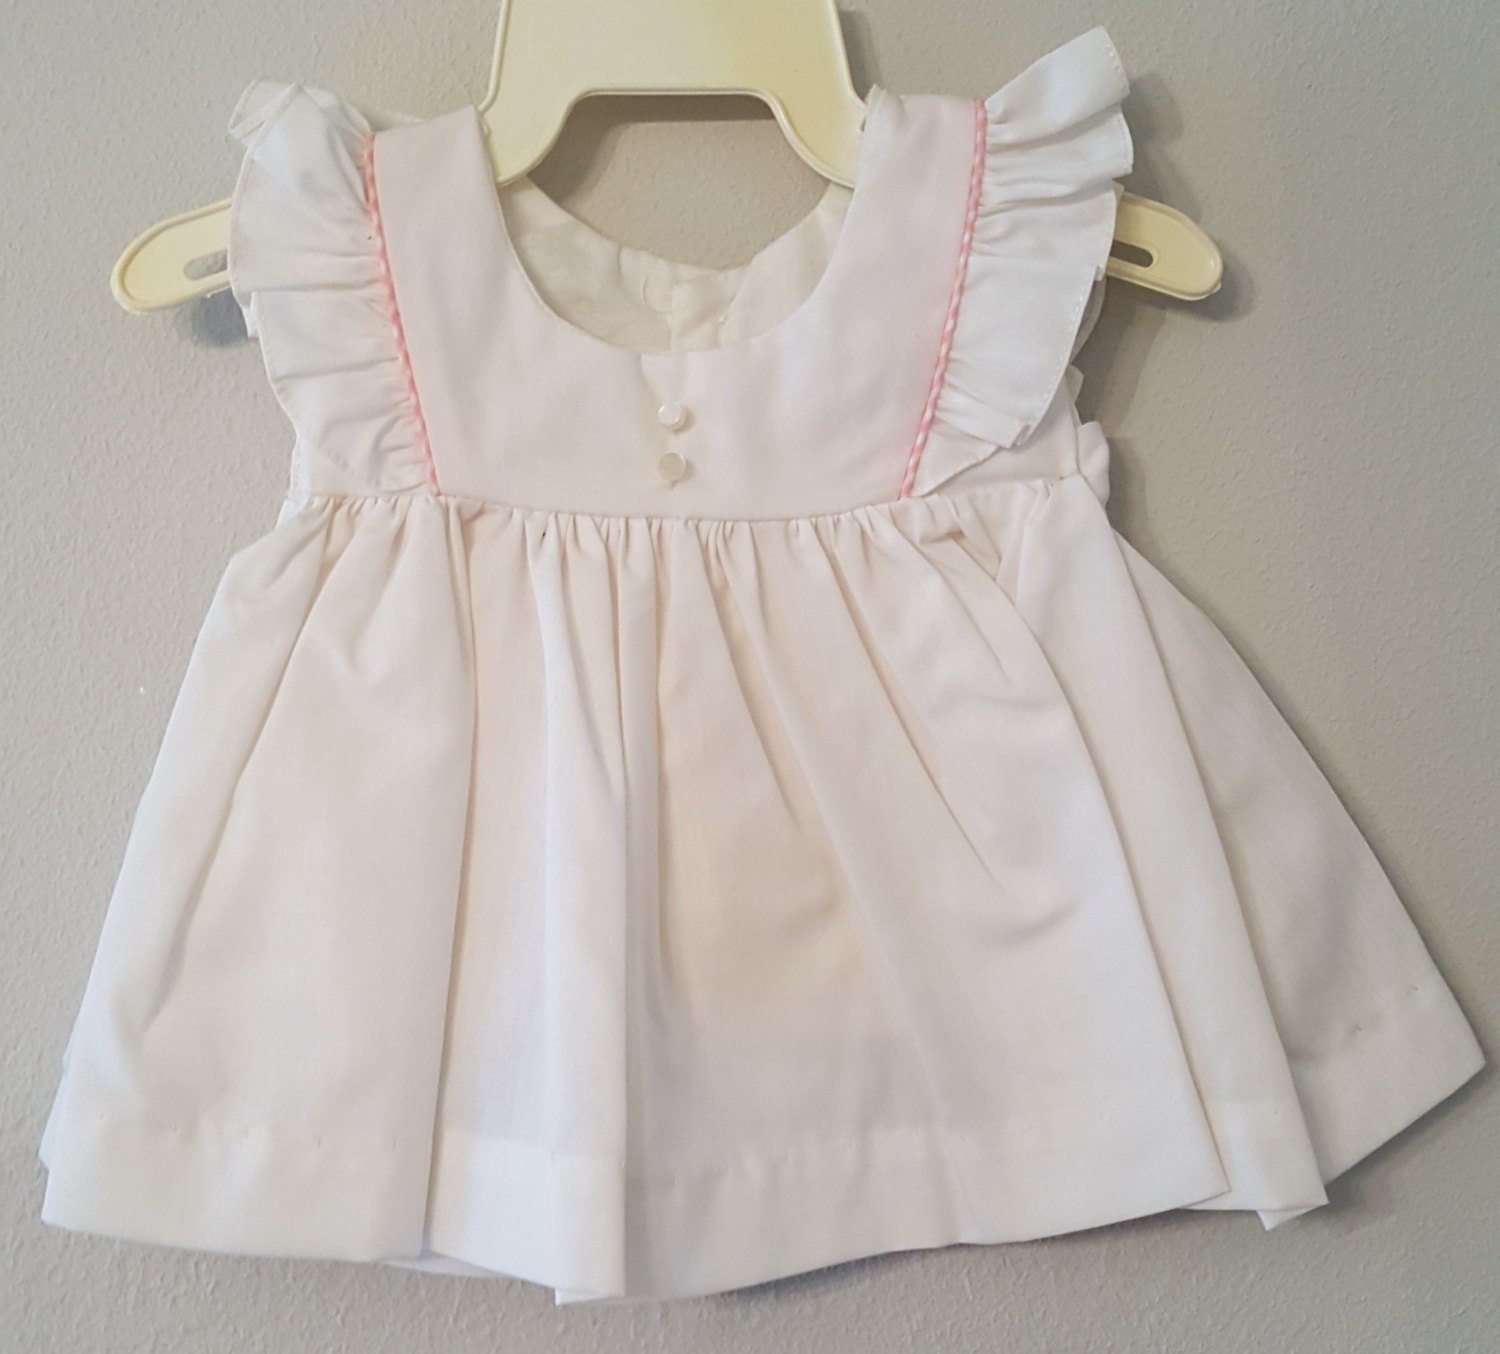 Vintage Baby Girl White Pinafore Dress and Bloomers by C.I.